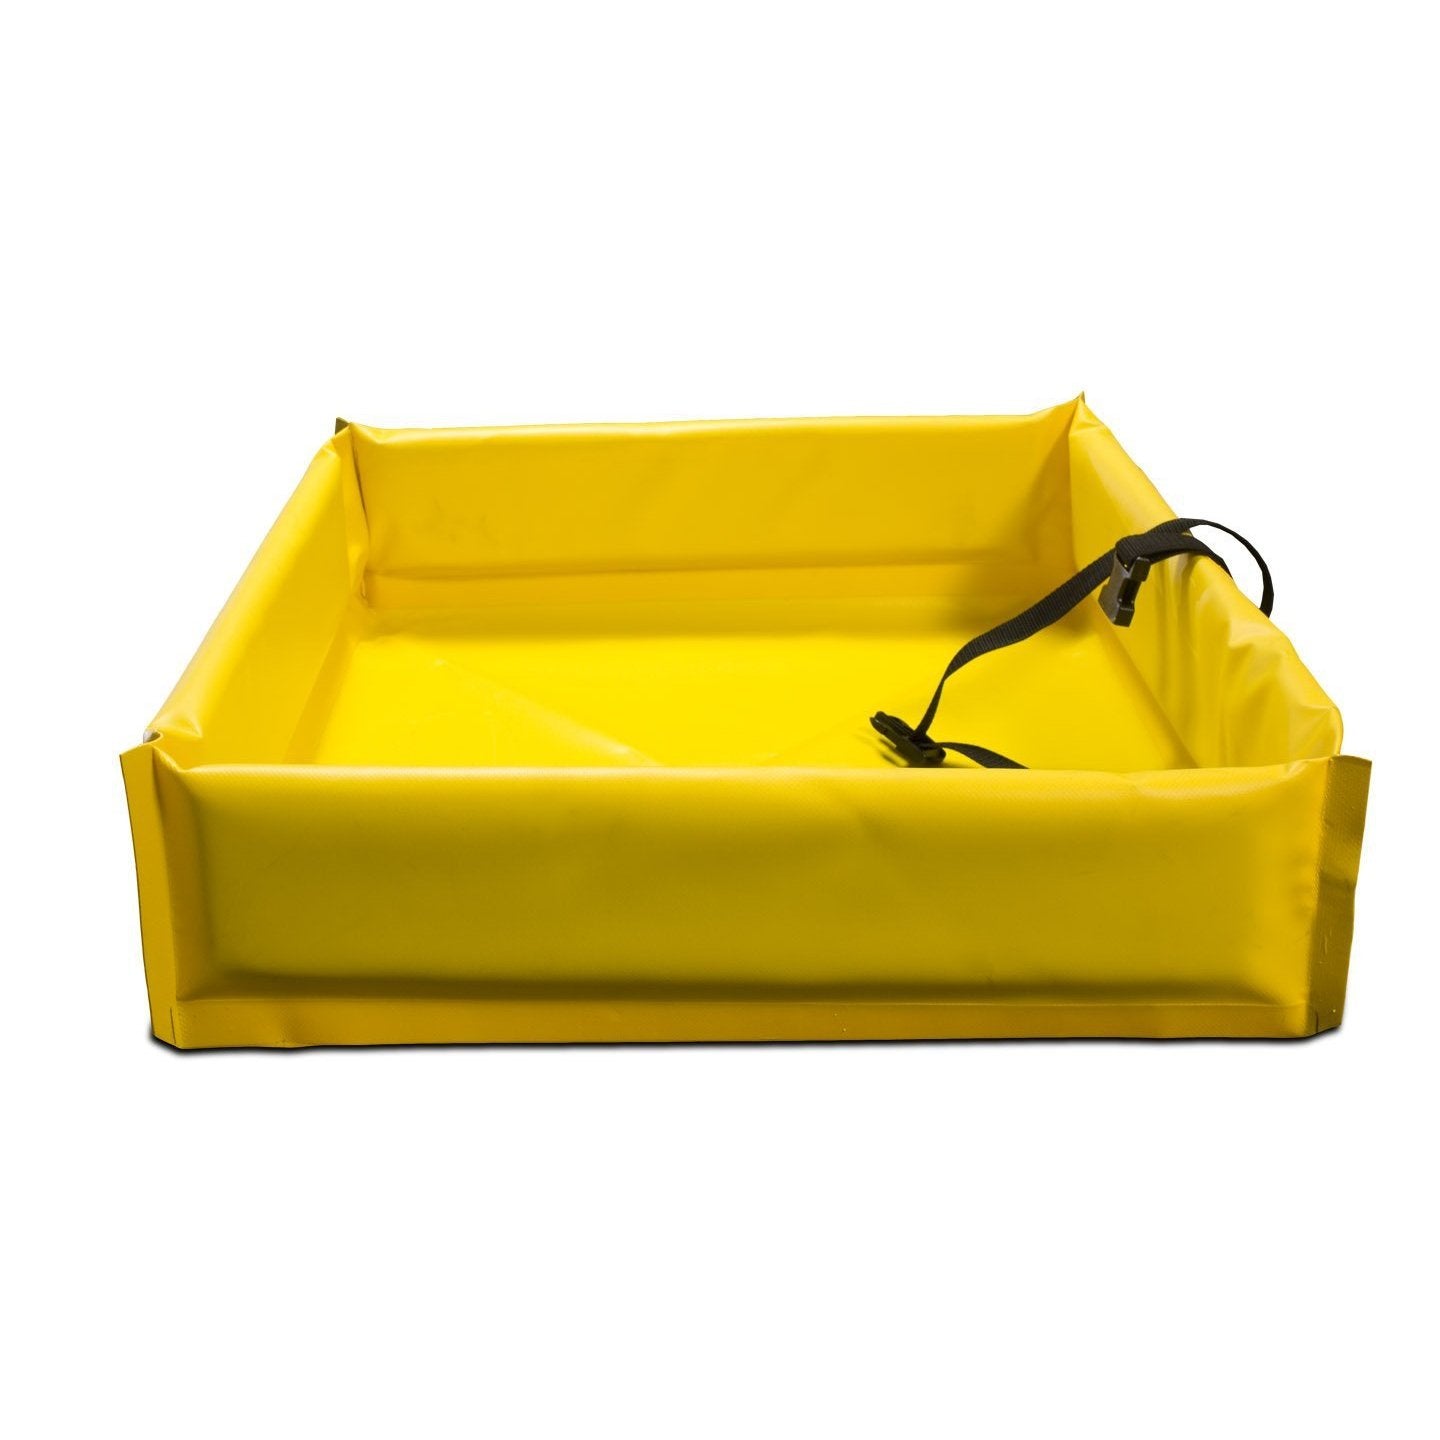 Portable Spill Containment Berms - 15 gal-eSafety Supplies, Inc